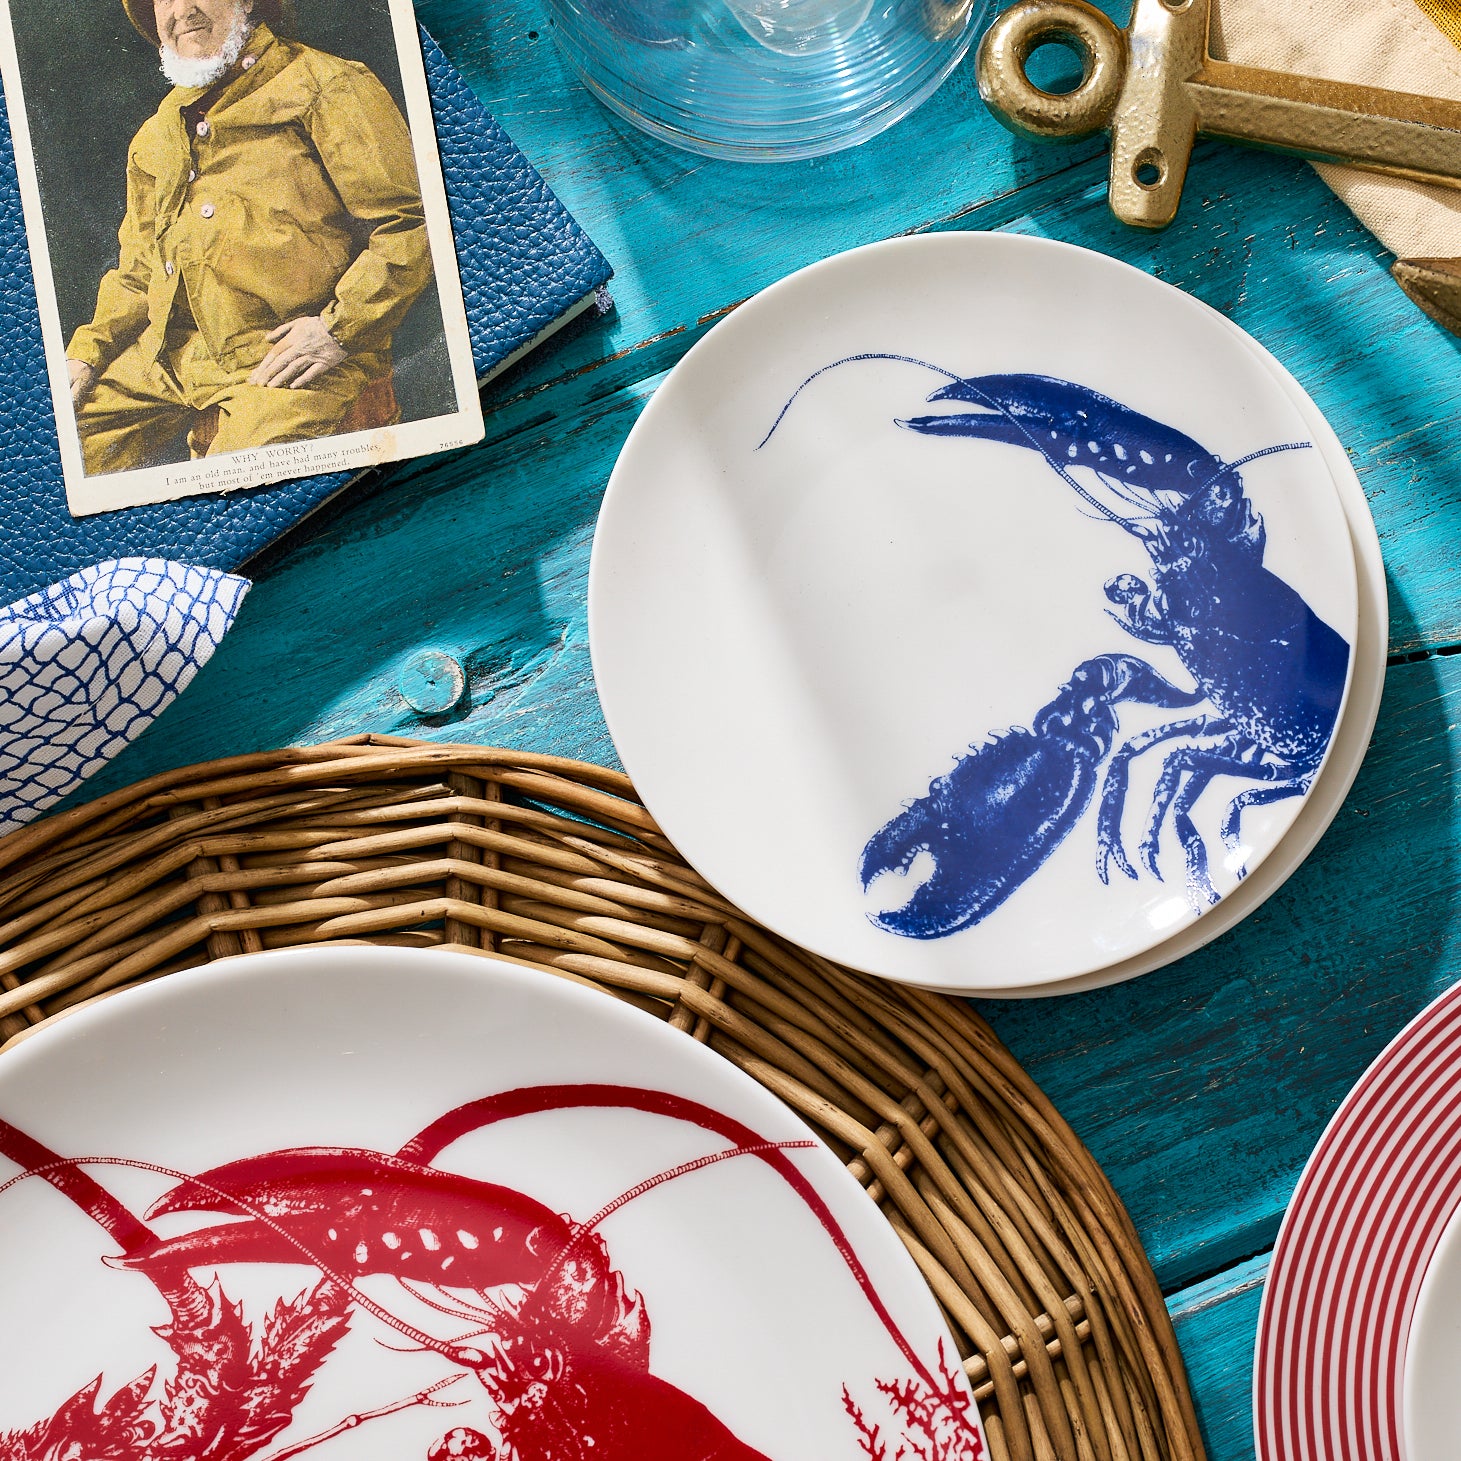 Four white heirloom-quality dinnerware plates each feature a blue lobster illustrated in the center. These Lobster Small Plates by Caskata Artisanal Home overlap slightly, beautifully displaying the entire lobster design, reminiscent of New England's coast.